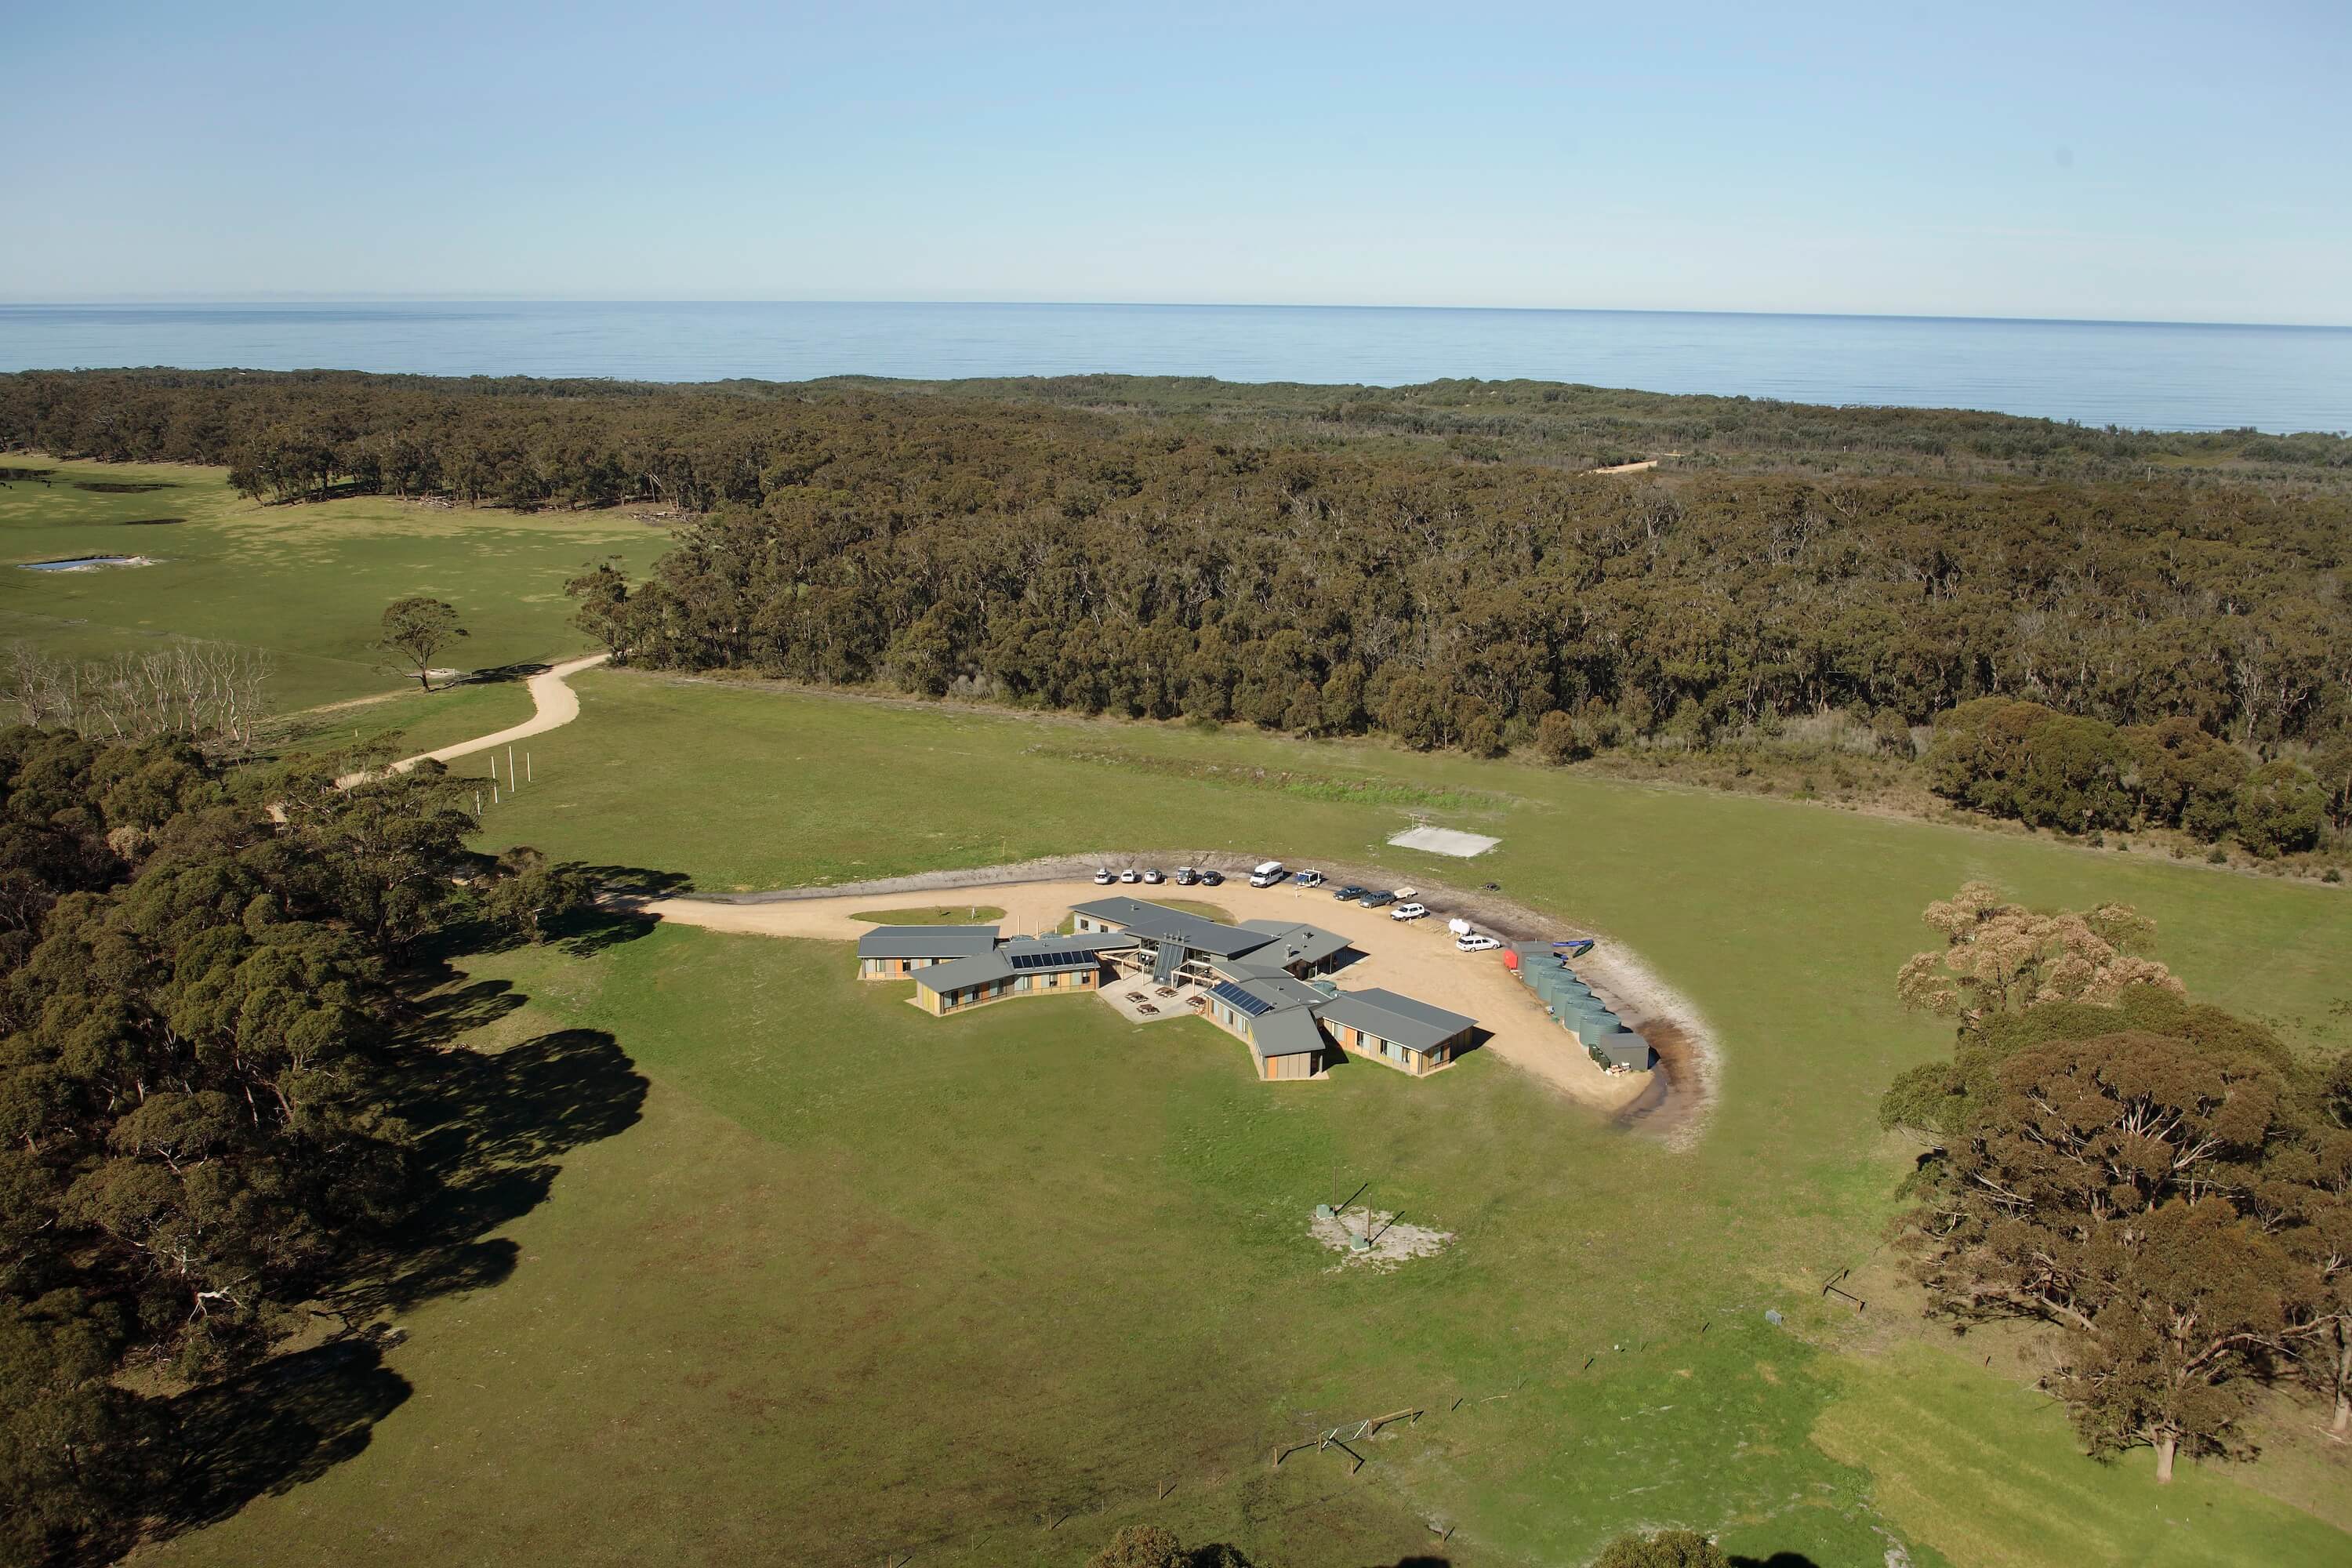 Wider aerial view of education facility in bushland by the sea